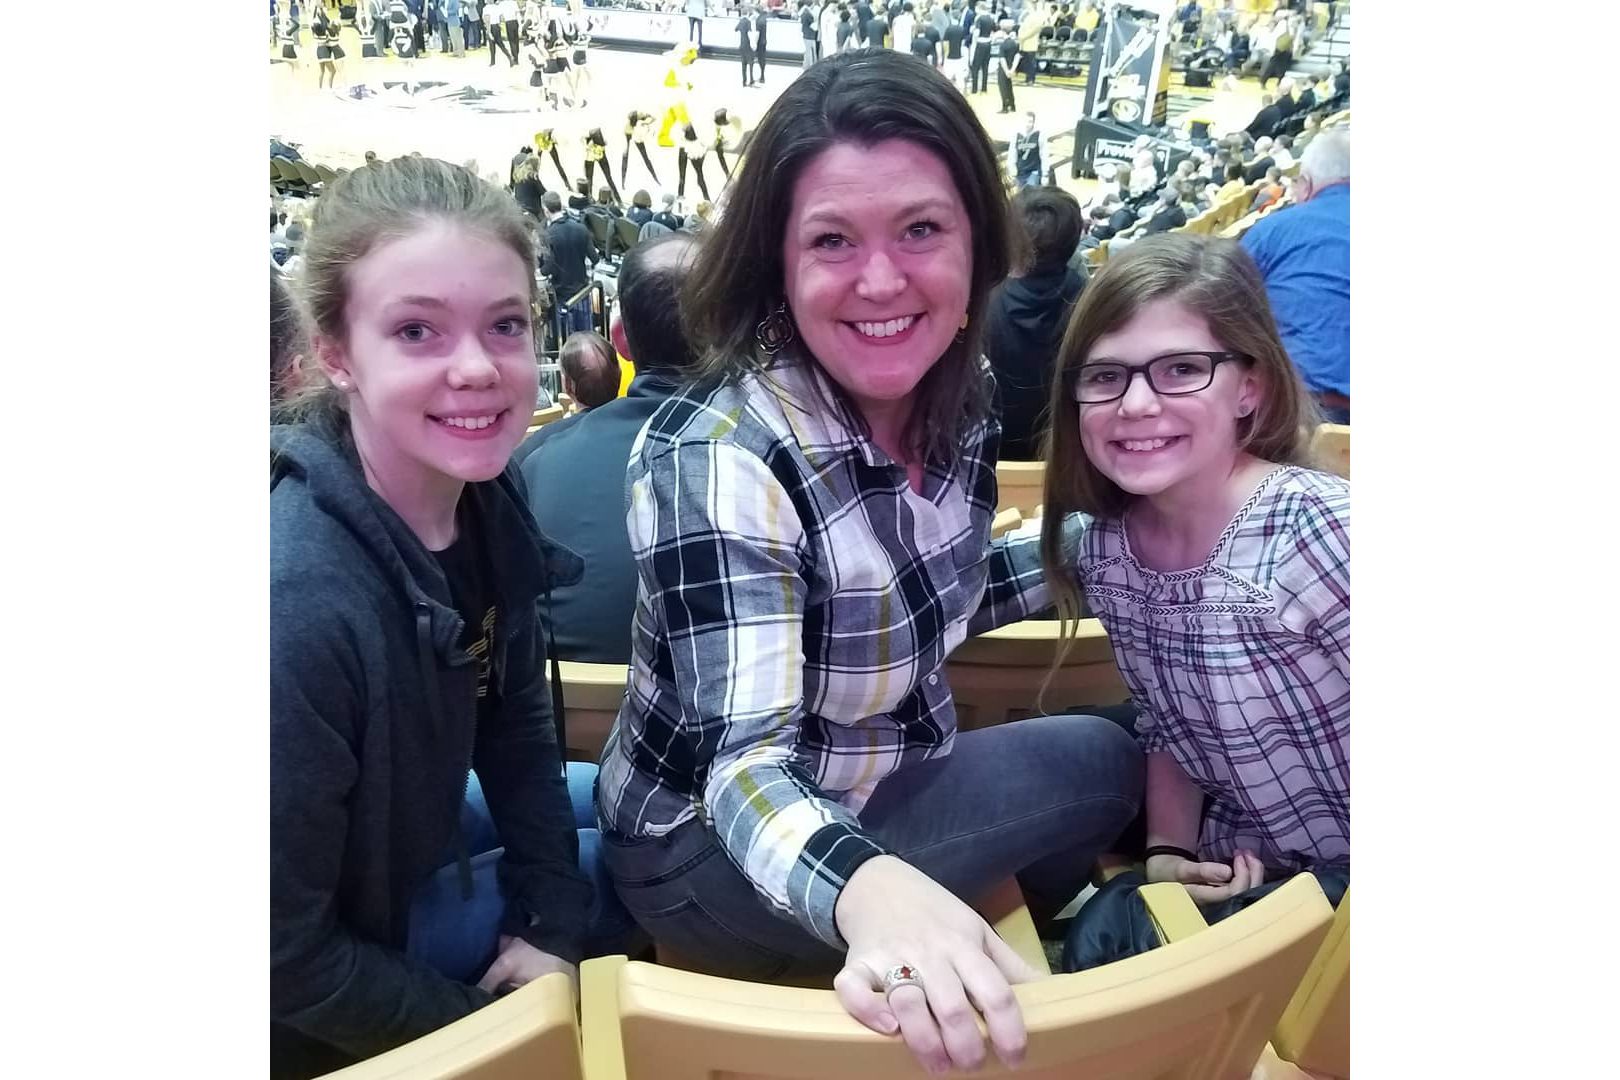 Megan Silvey and her daughters pose for a photo. They're at a Mizzou basketball game